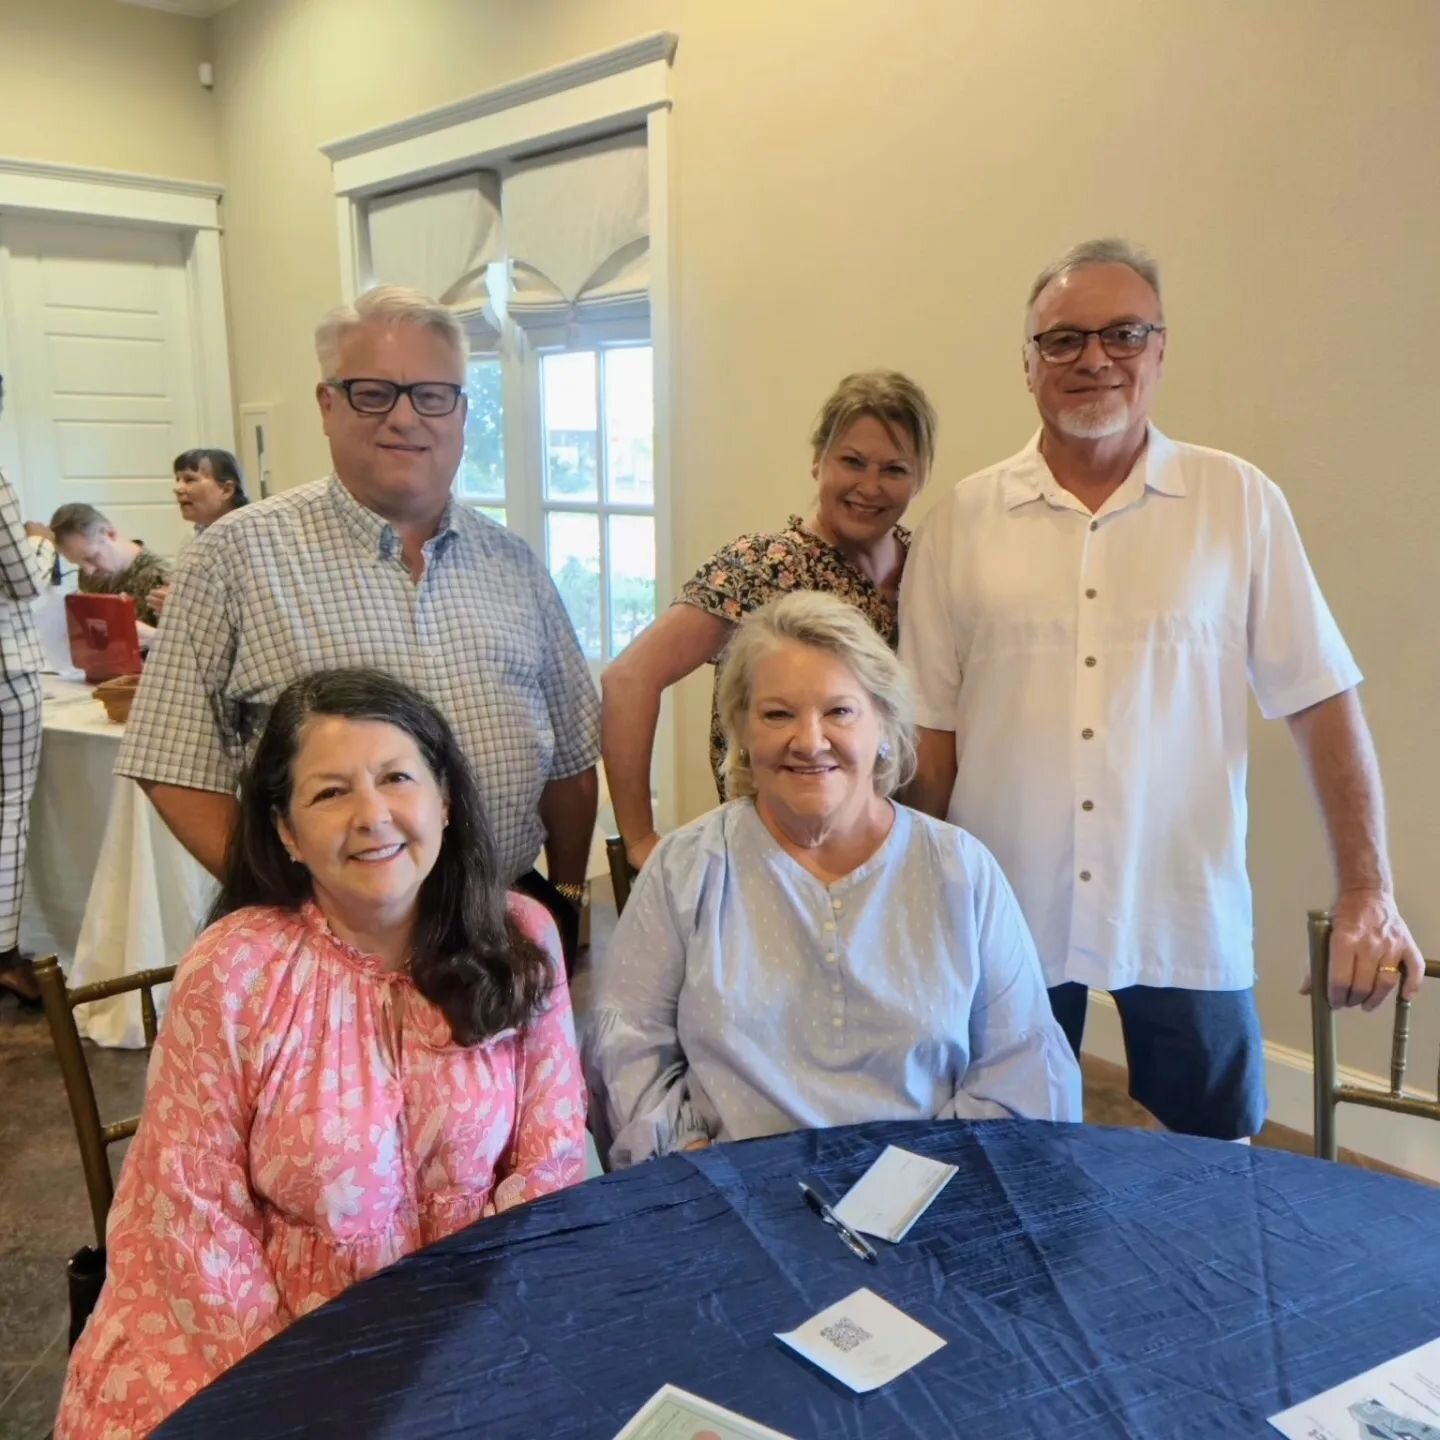 Thank you to everyone who helped us celebrate 30 years of the Oaks Historic District last night at @the_laurels! From city officials, to residents and supporters, our membership drive was a huge success. Thank you for your continued support and inter